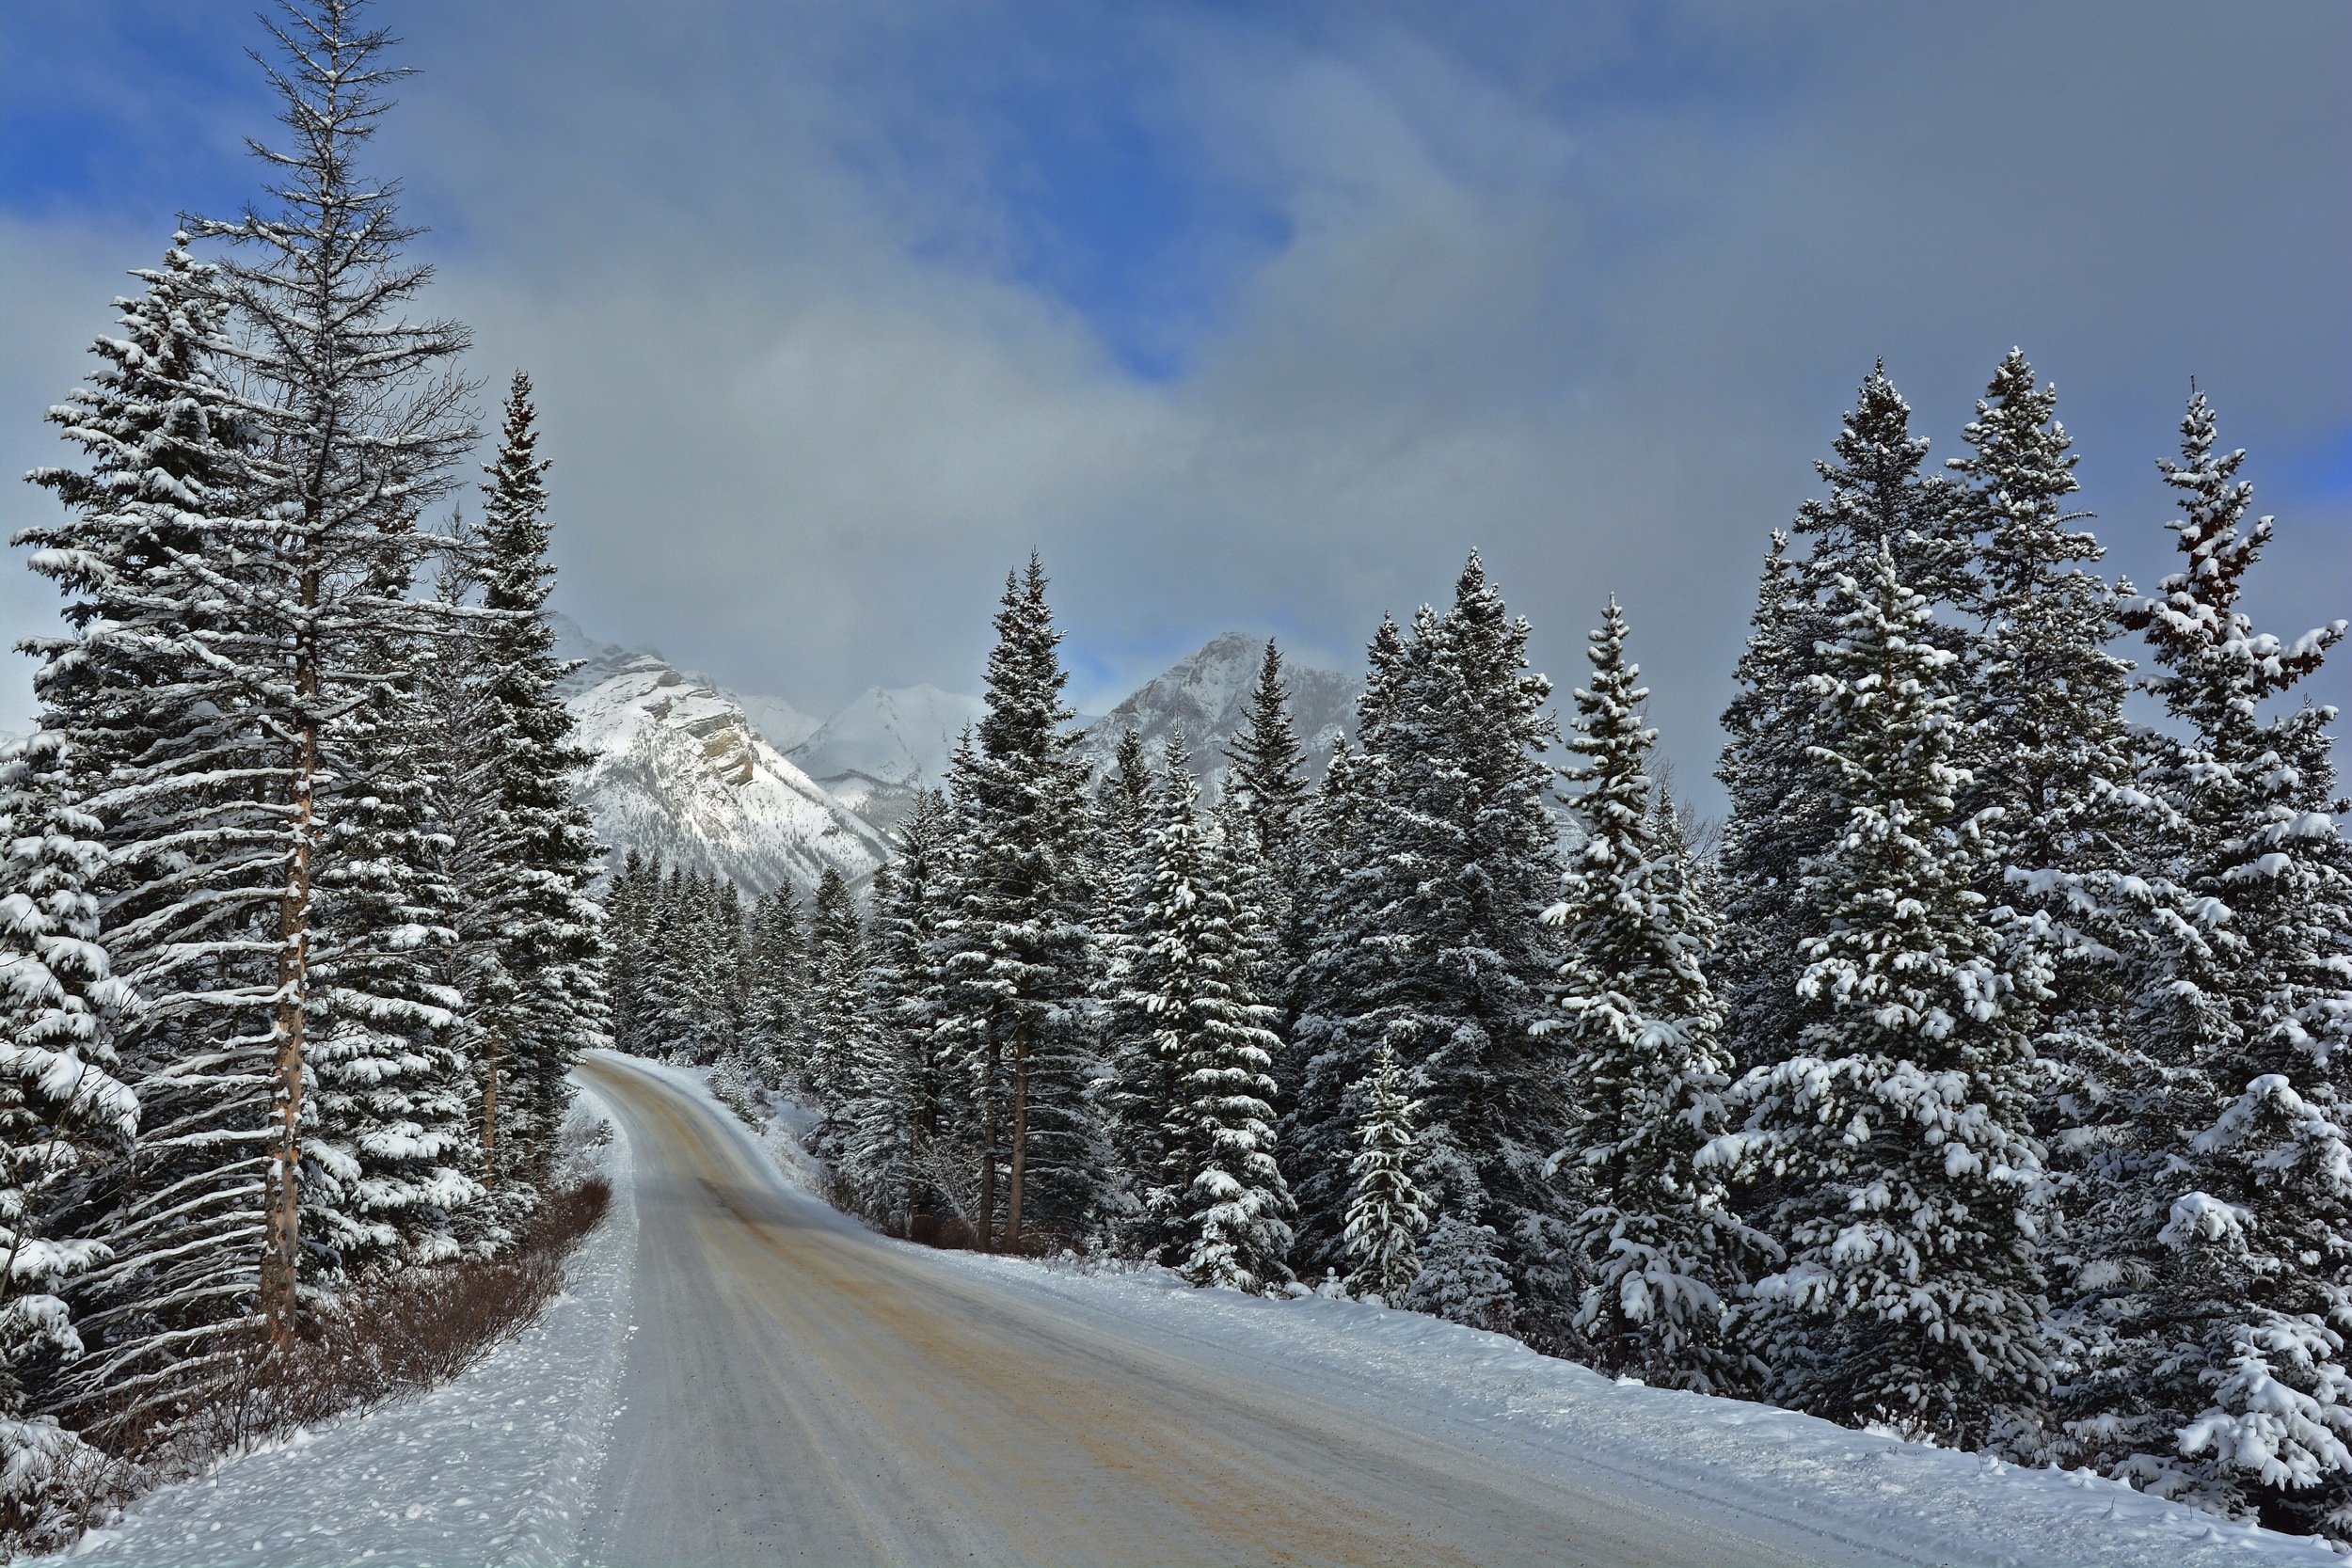 man made, road, banff national park, canada, landscape, mountain, pine, snow, tree, winter images